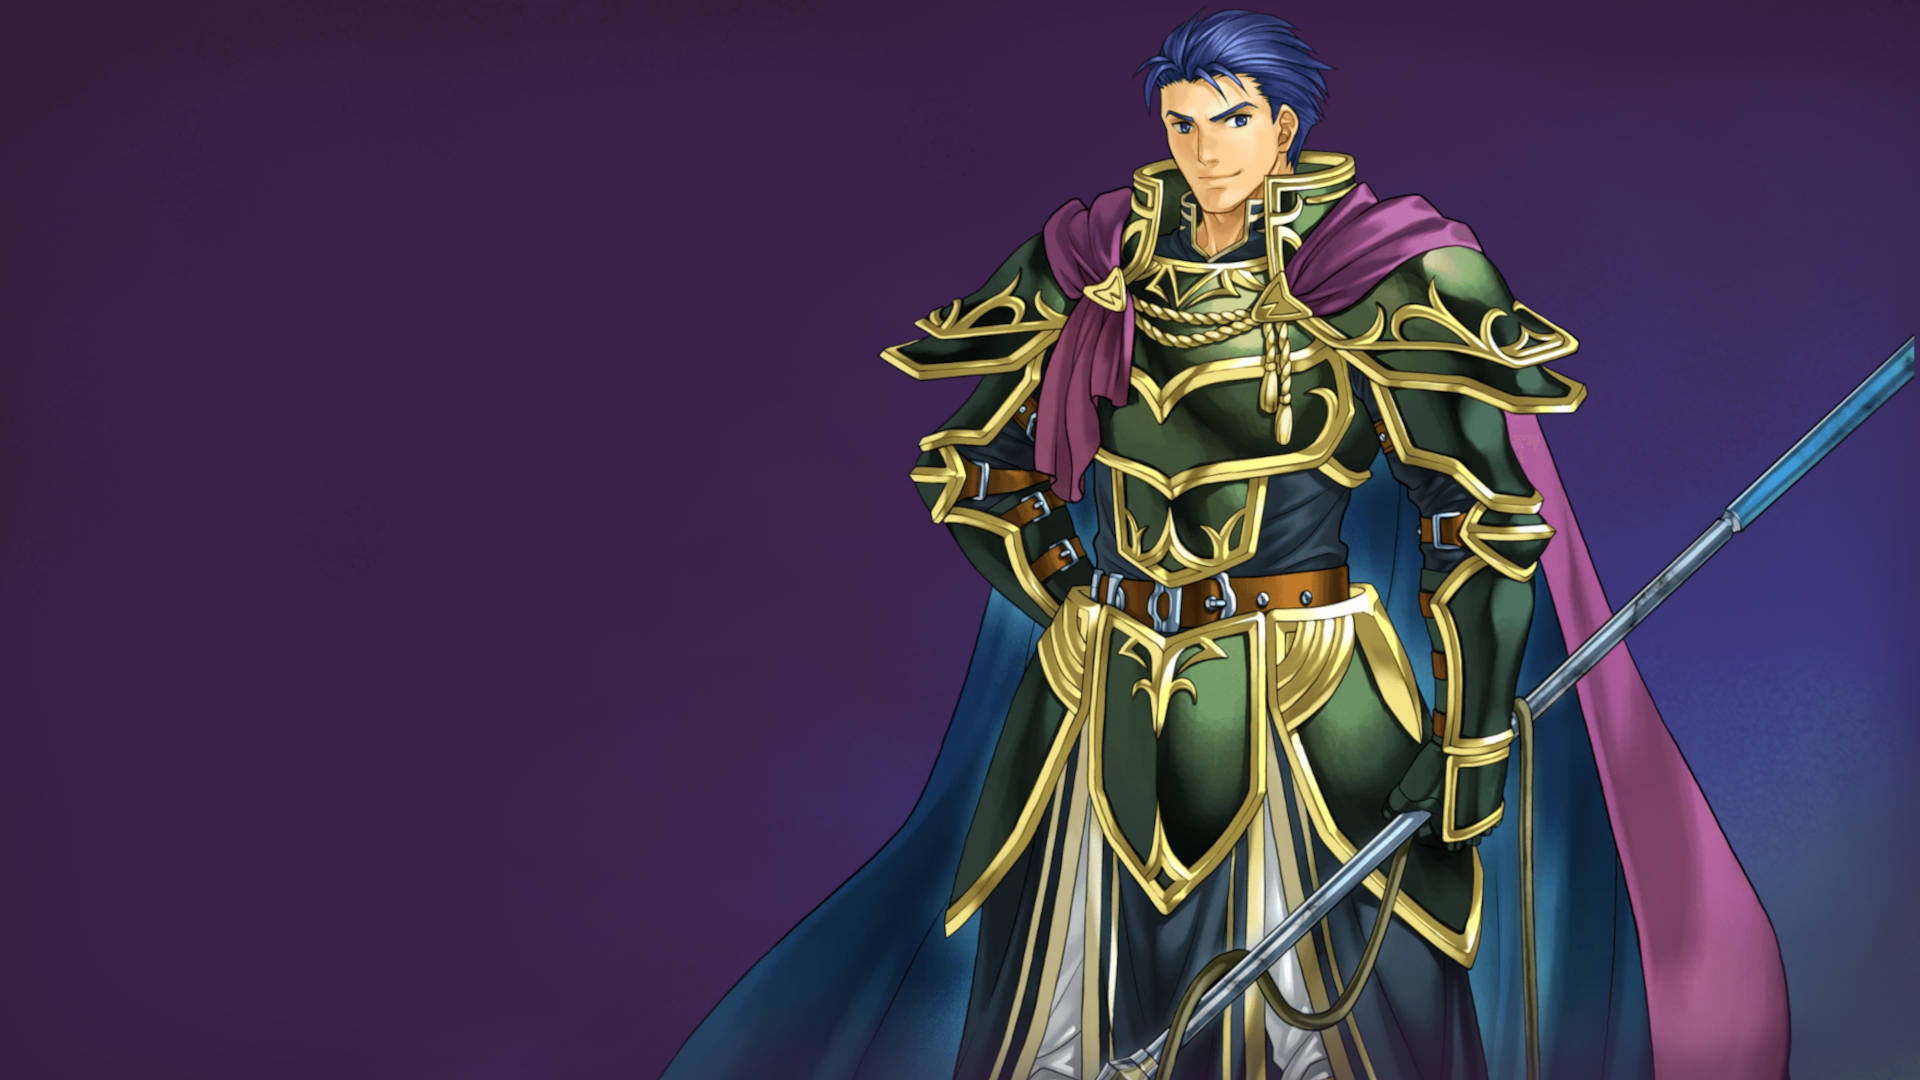 Fire Emblem Heroes character Brave Hector, with his hand on his hip and the other on his sword